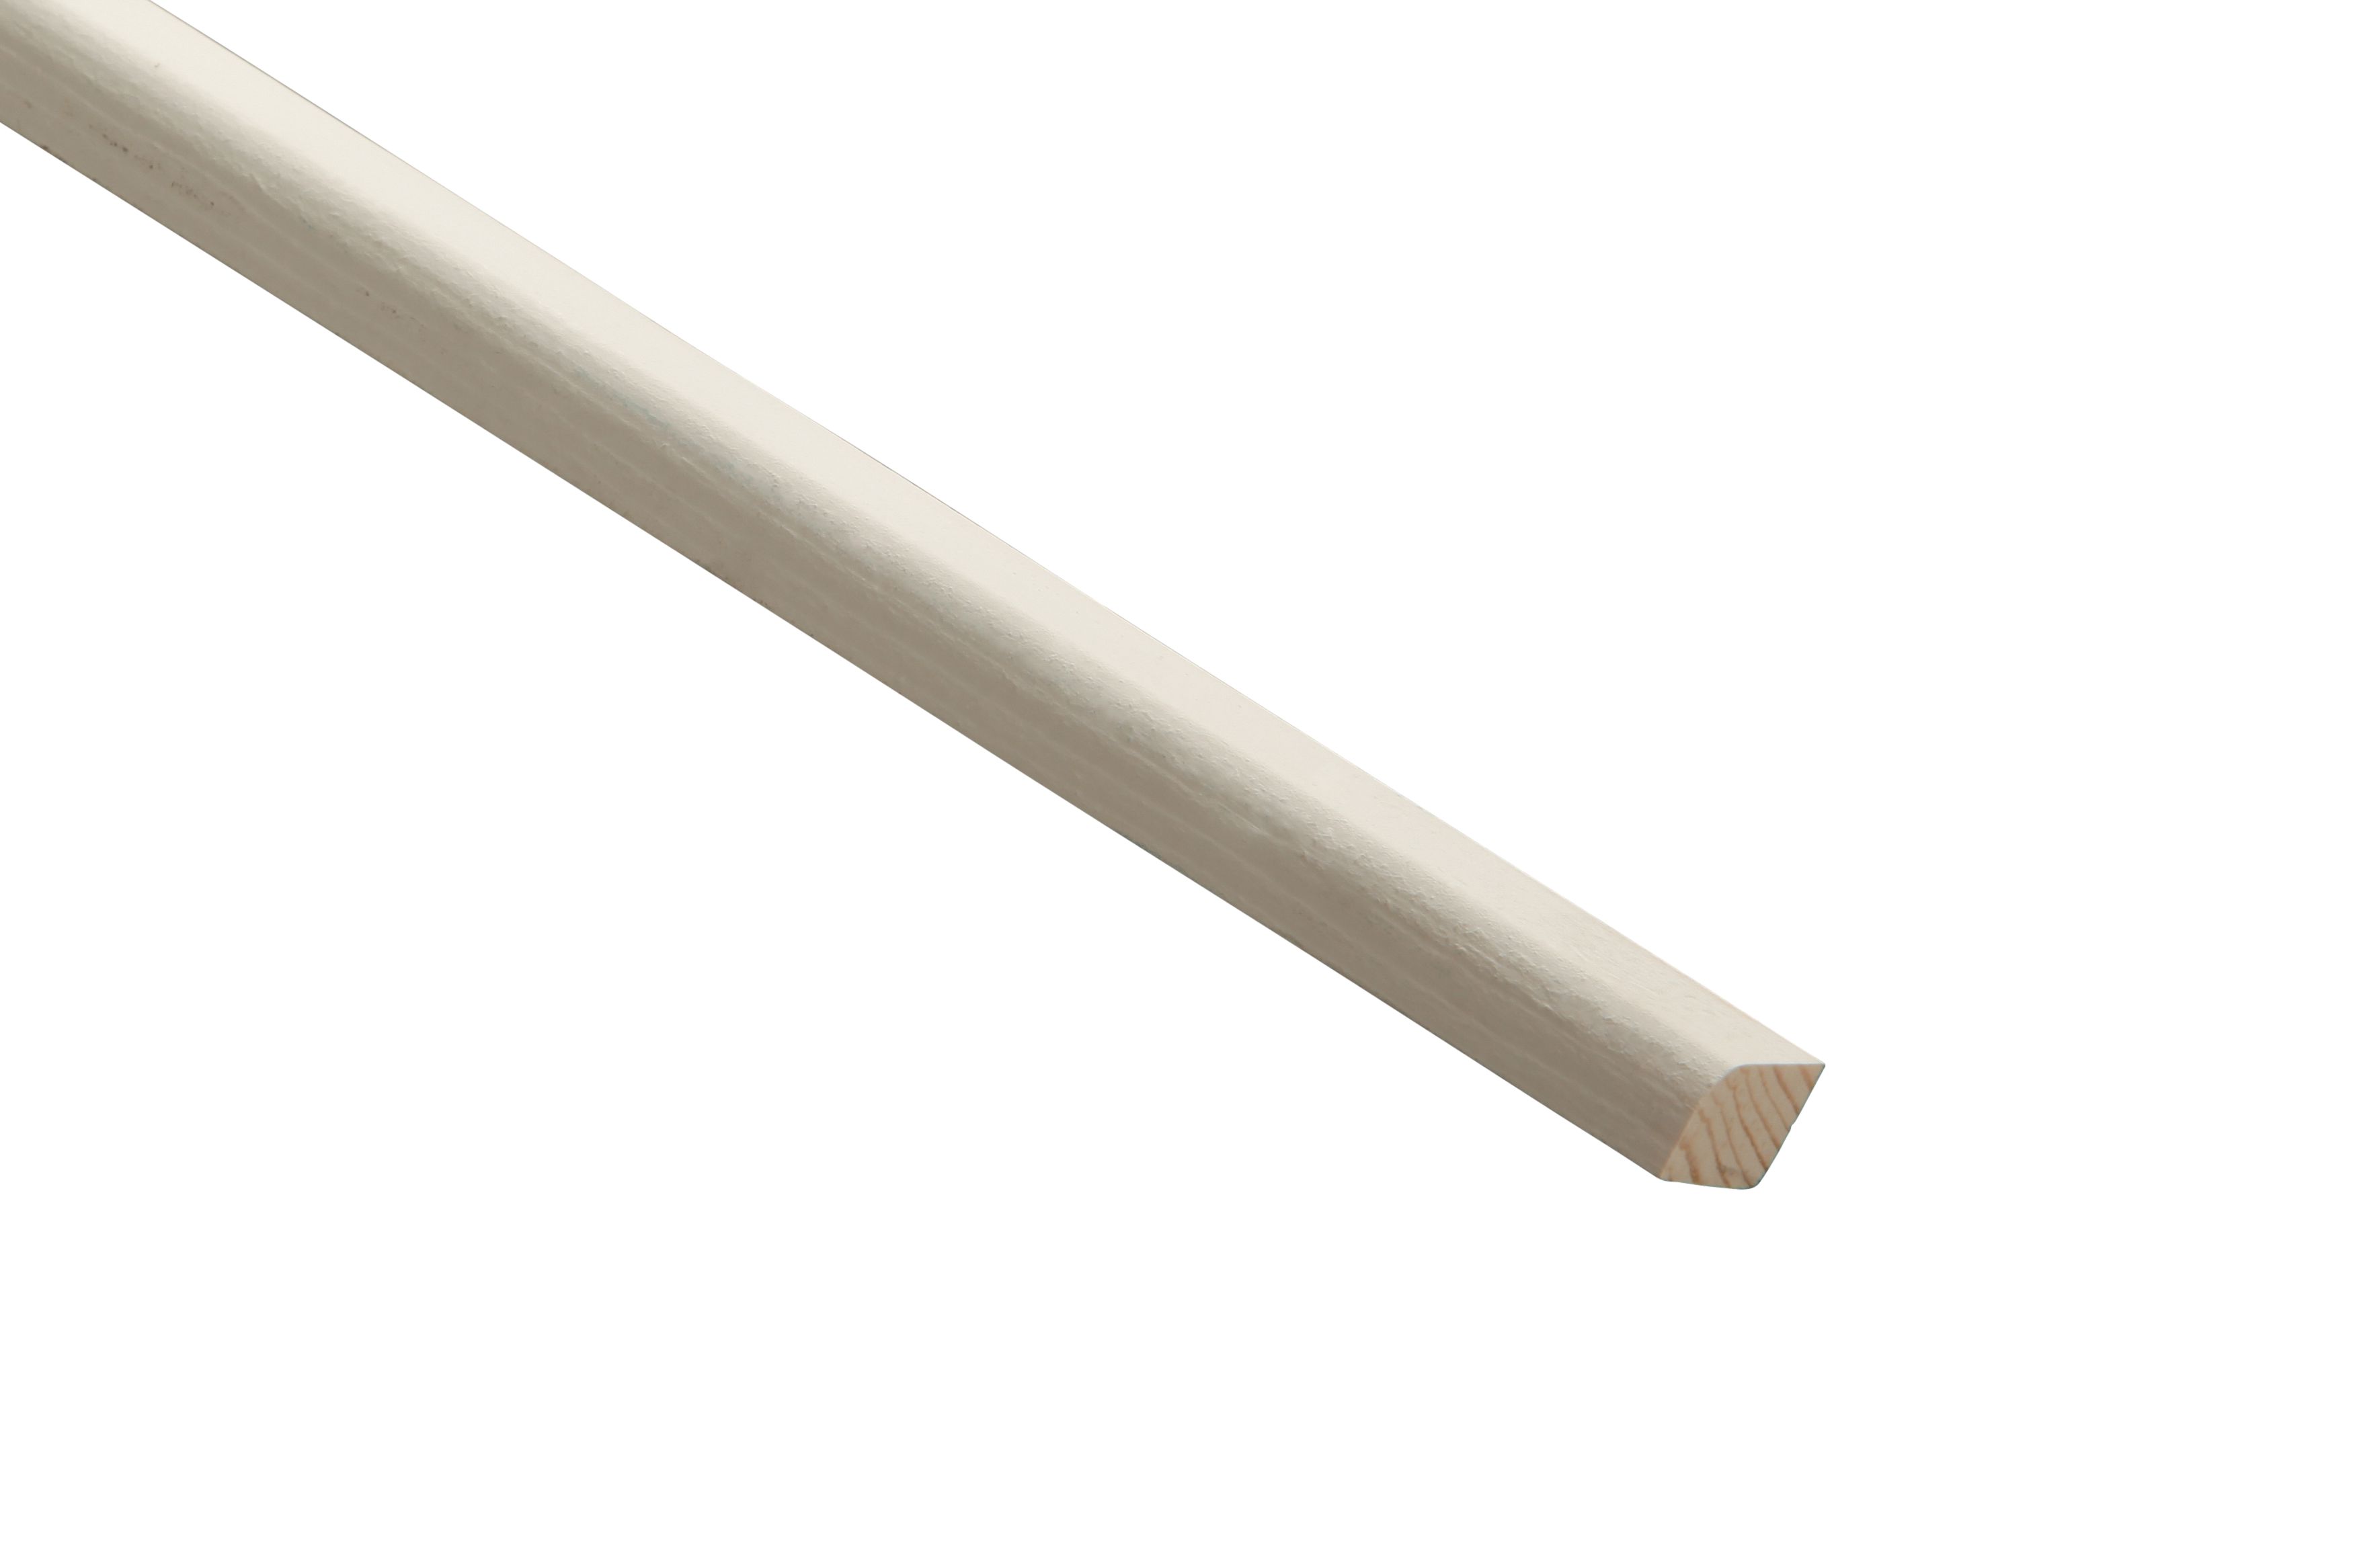 Wickes Primed White Glass Bead Moulding - 10 x 15 x 2400mm